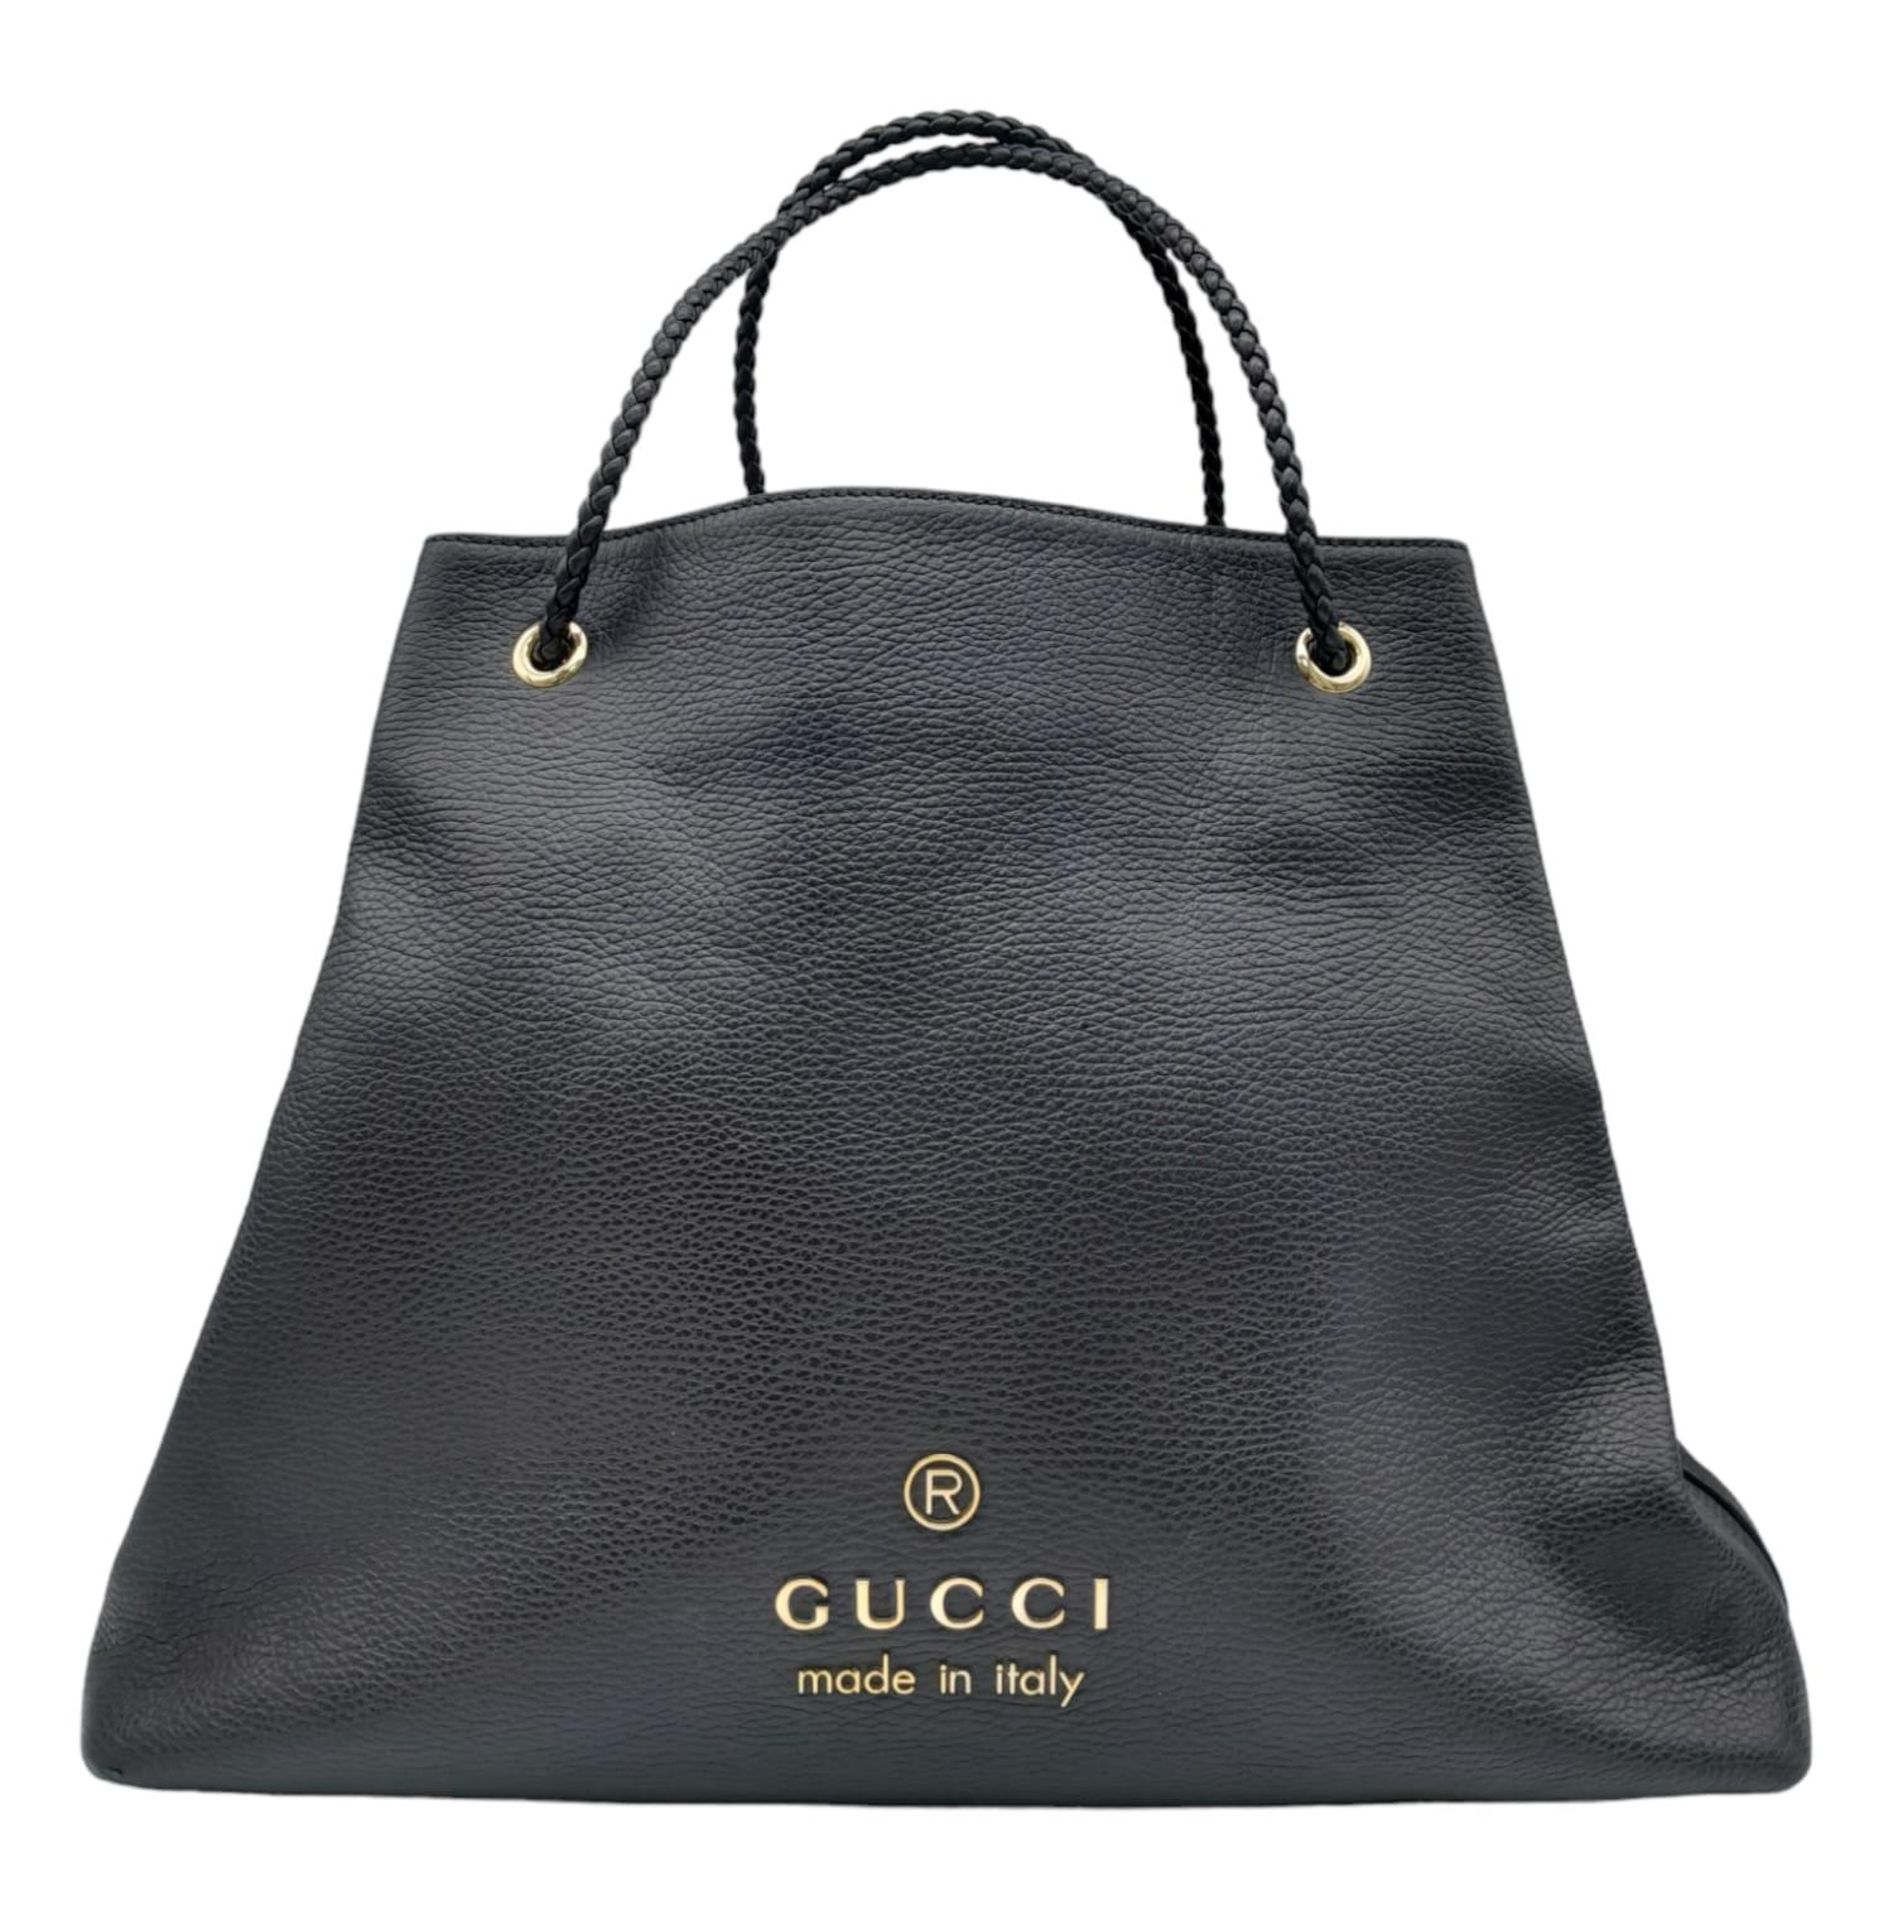 A large black Gucci calfskin Gifford bag with braided handles. Open top with black fabric